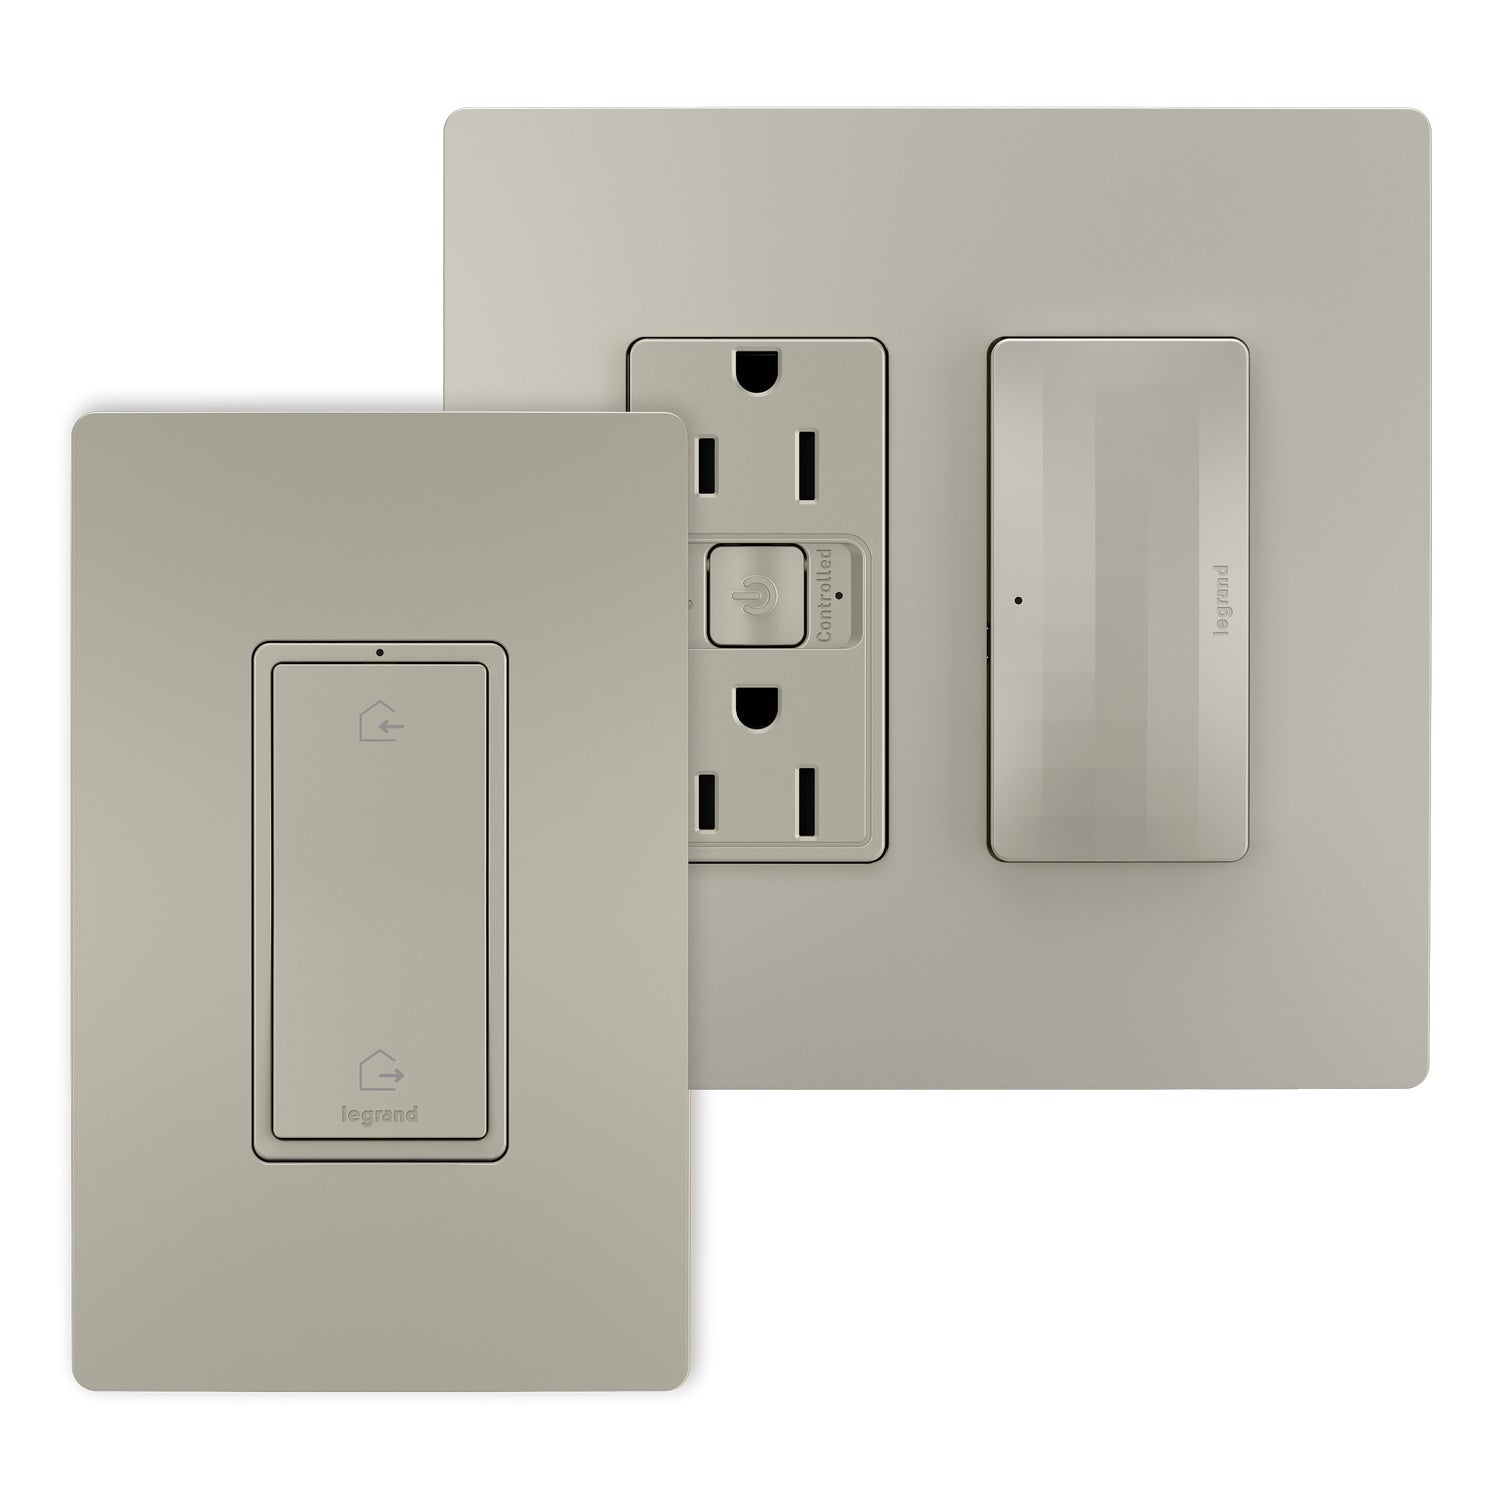 Legrand Canada - WNRH15KITNI - Outlet Kit With H/A Switch - Nickel